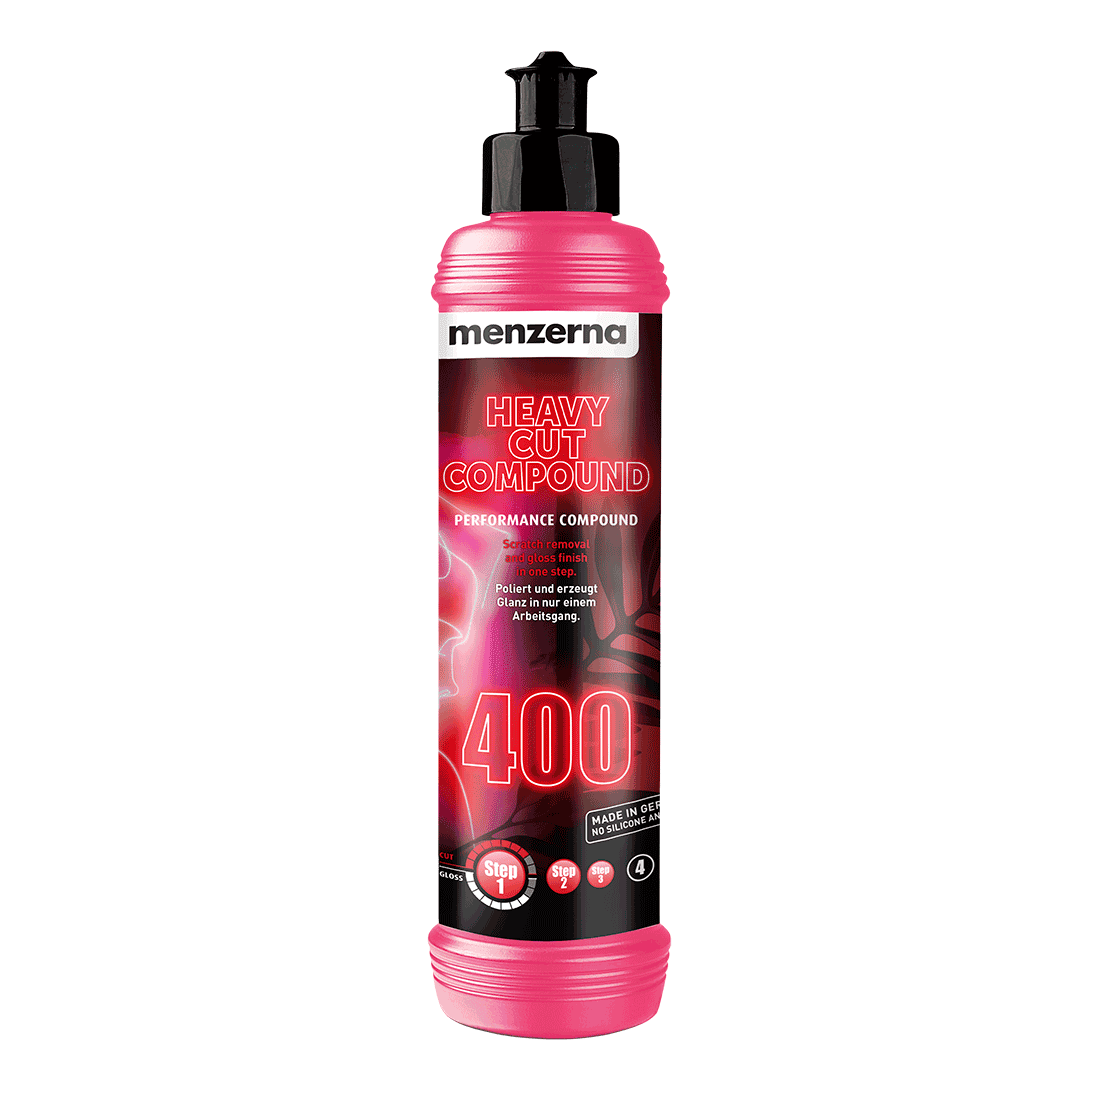 Menzerna 1000 Heavy Cut Compound Review - Swirl & Scratch Remover